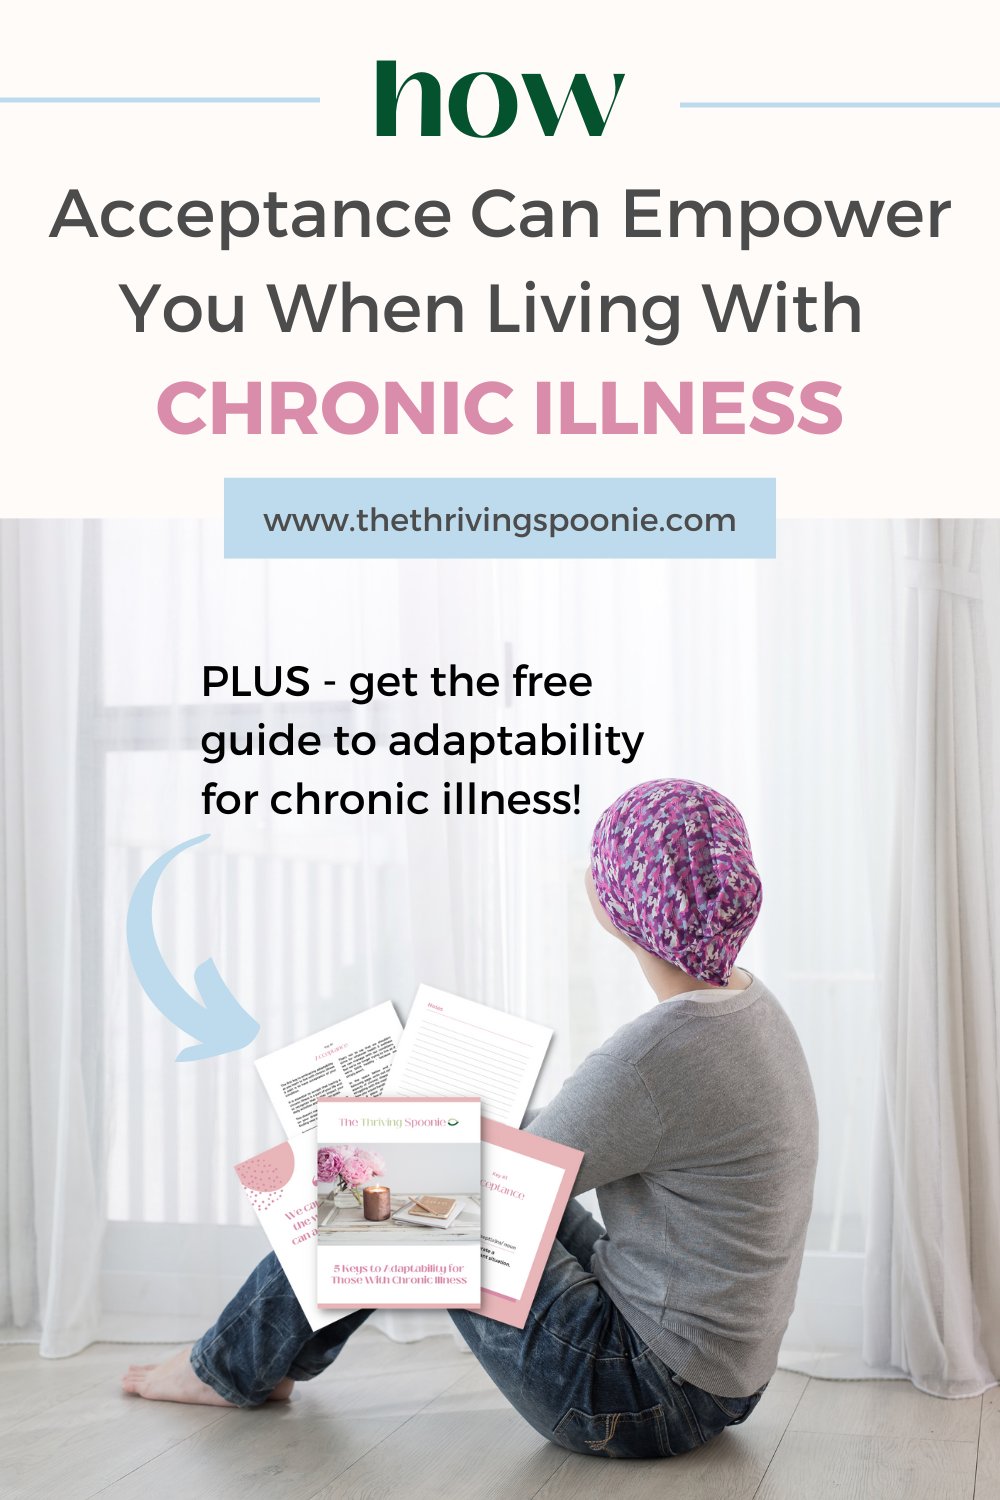 Living with a chronic illness can be challenging, both physically and emotionally. Acceptance is one way to combat these challenges, so keep reading to learn how to embrace this practice to live life more joyfully - despite your illness or condition. Learn how in this blog post!